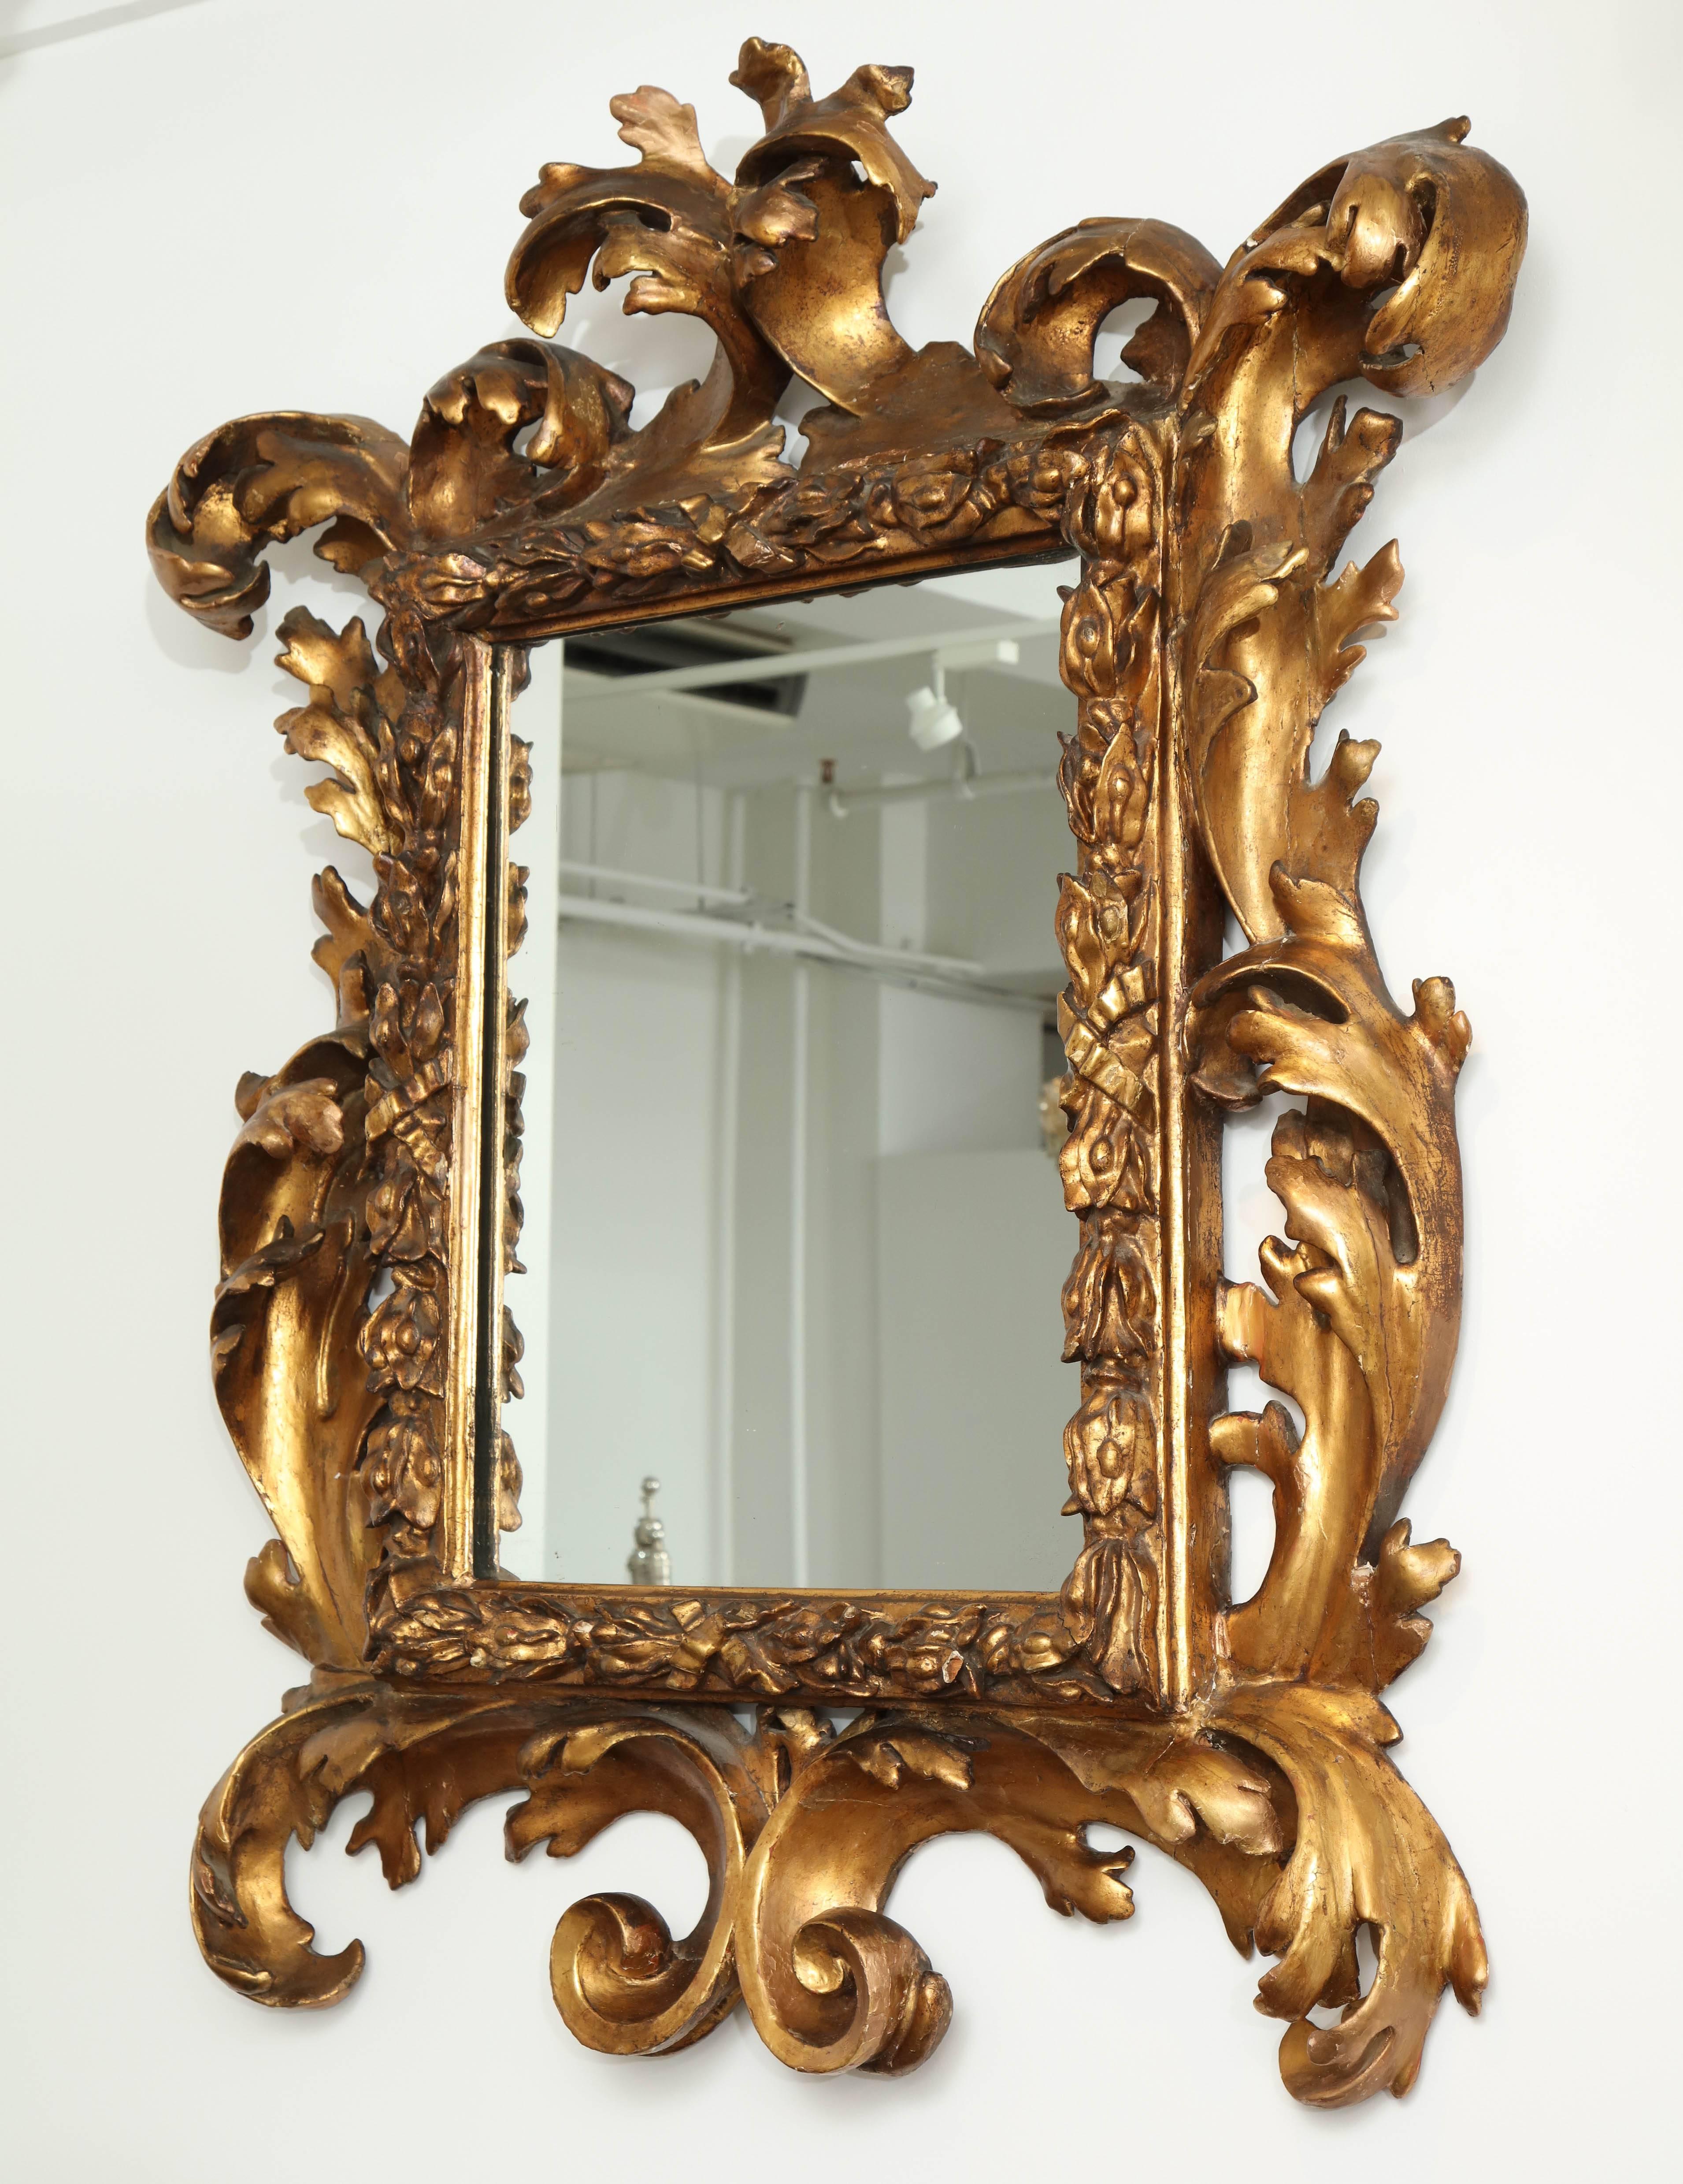 This 18th century Italian large Baroque gilded mirror is a true statement piece.
The elaborately carved gilded frame with open scroll work and acanthus leaf decoration is in great condition with minimal restorations.